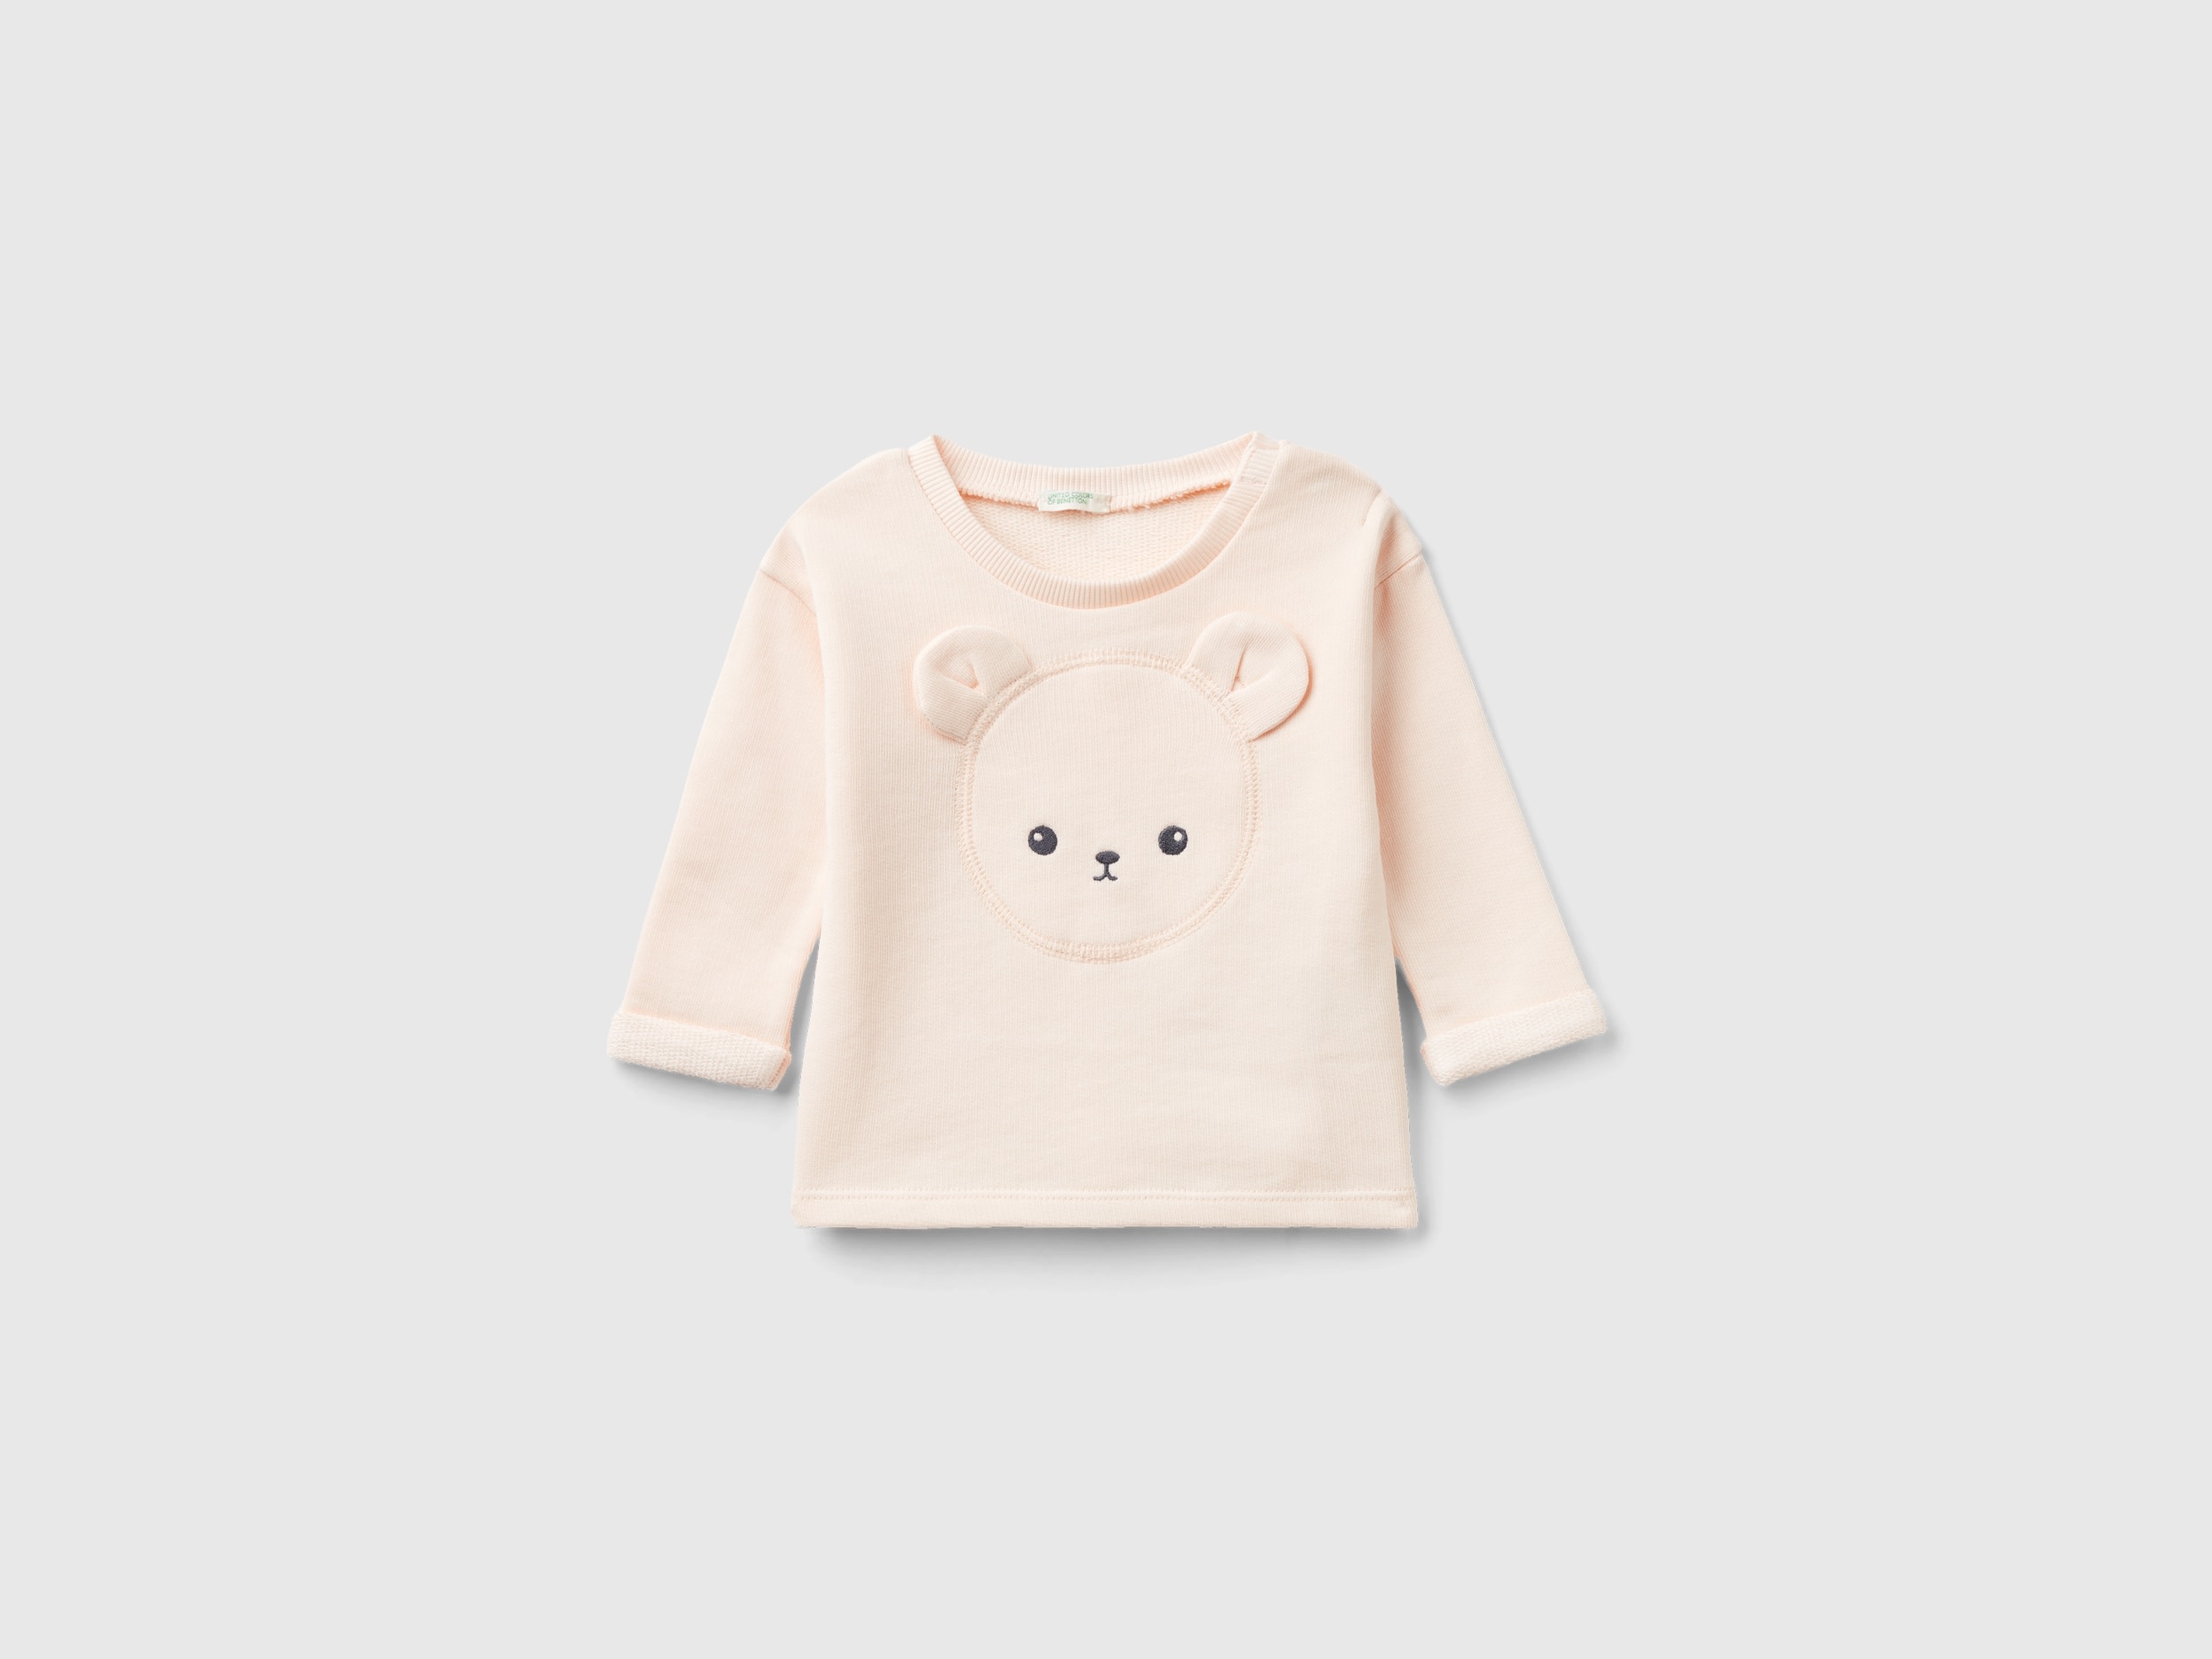 Image of Benetton, Organic Cotton Sweatshirt With Embroidery, size 74, Peach, Kids